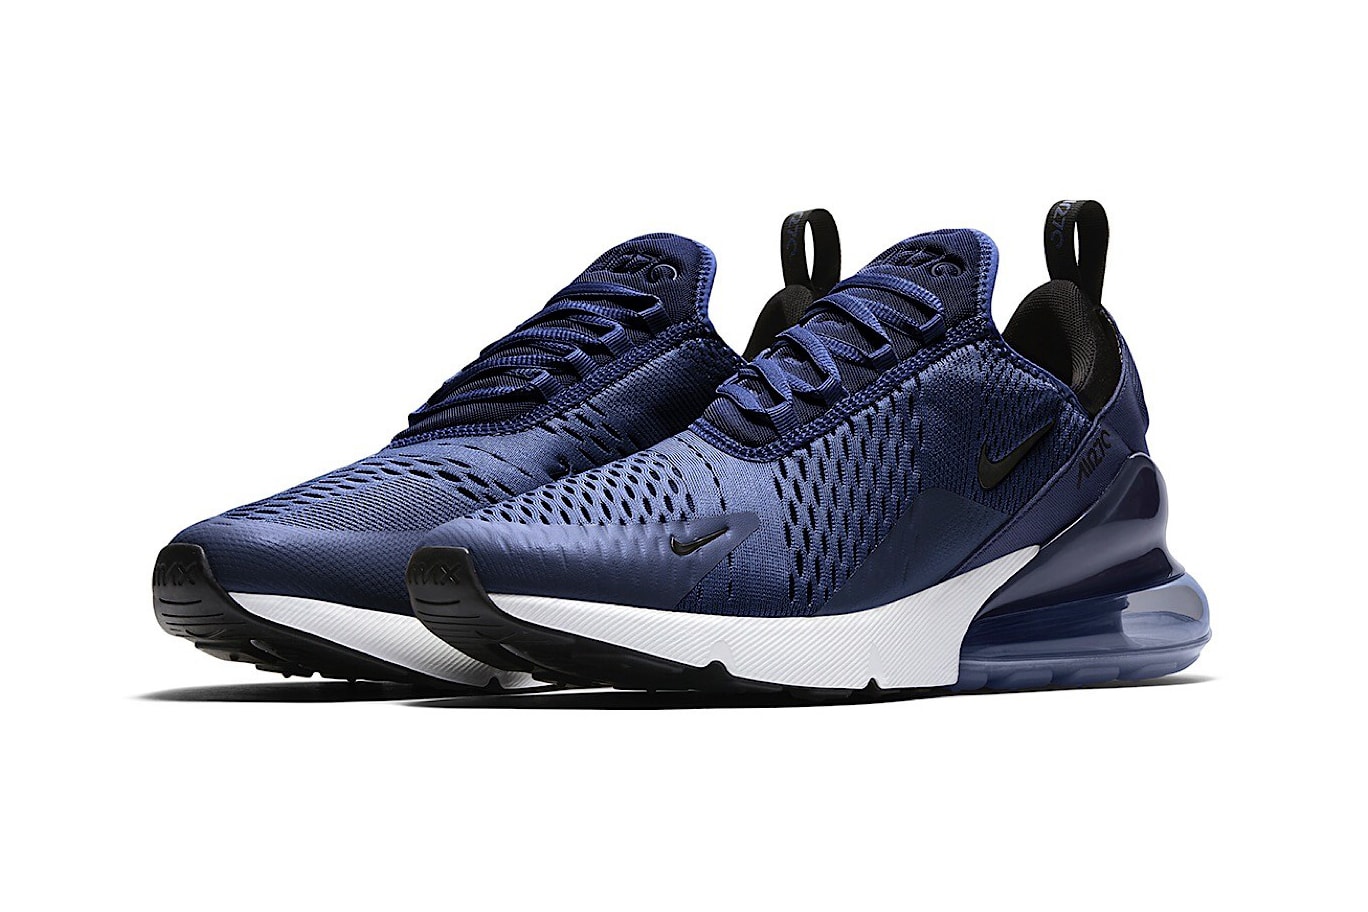 Nike Air Max 270 Navy release date march 2018